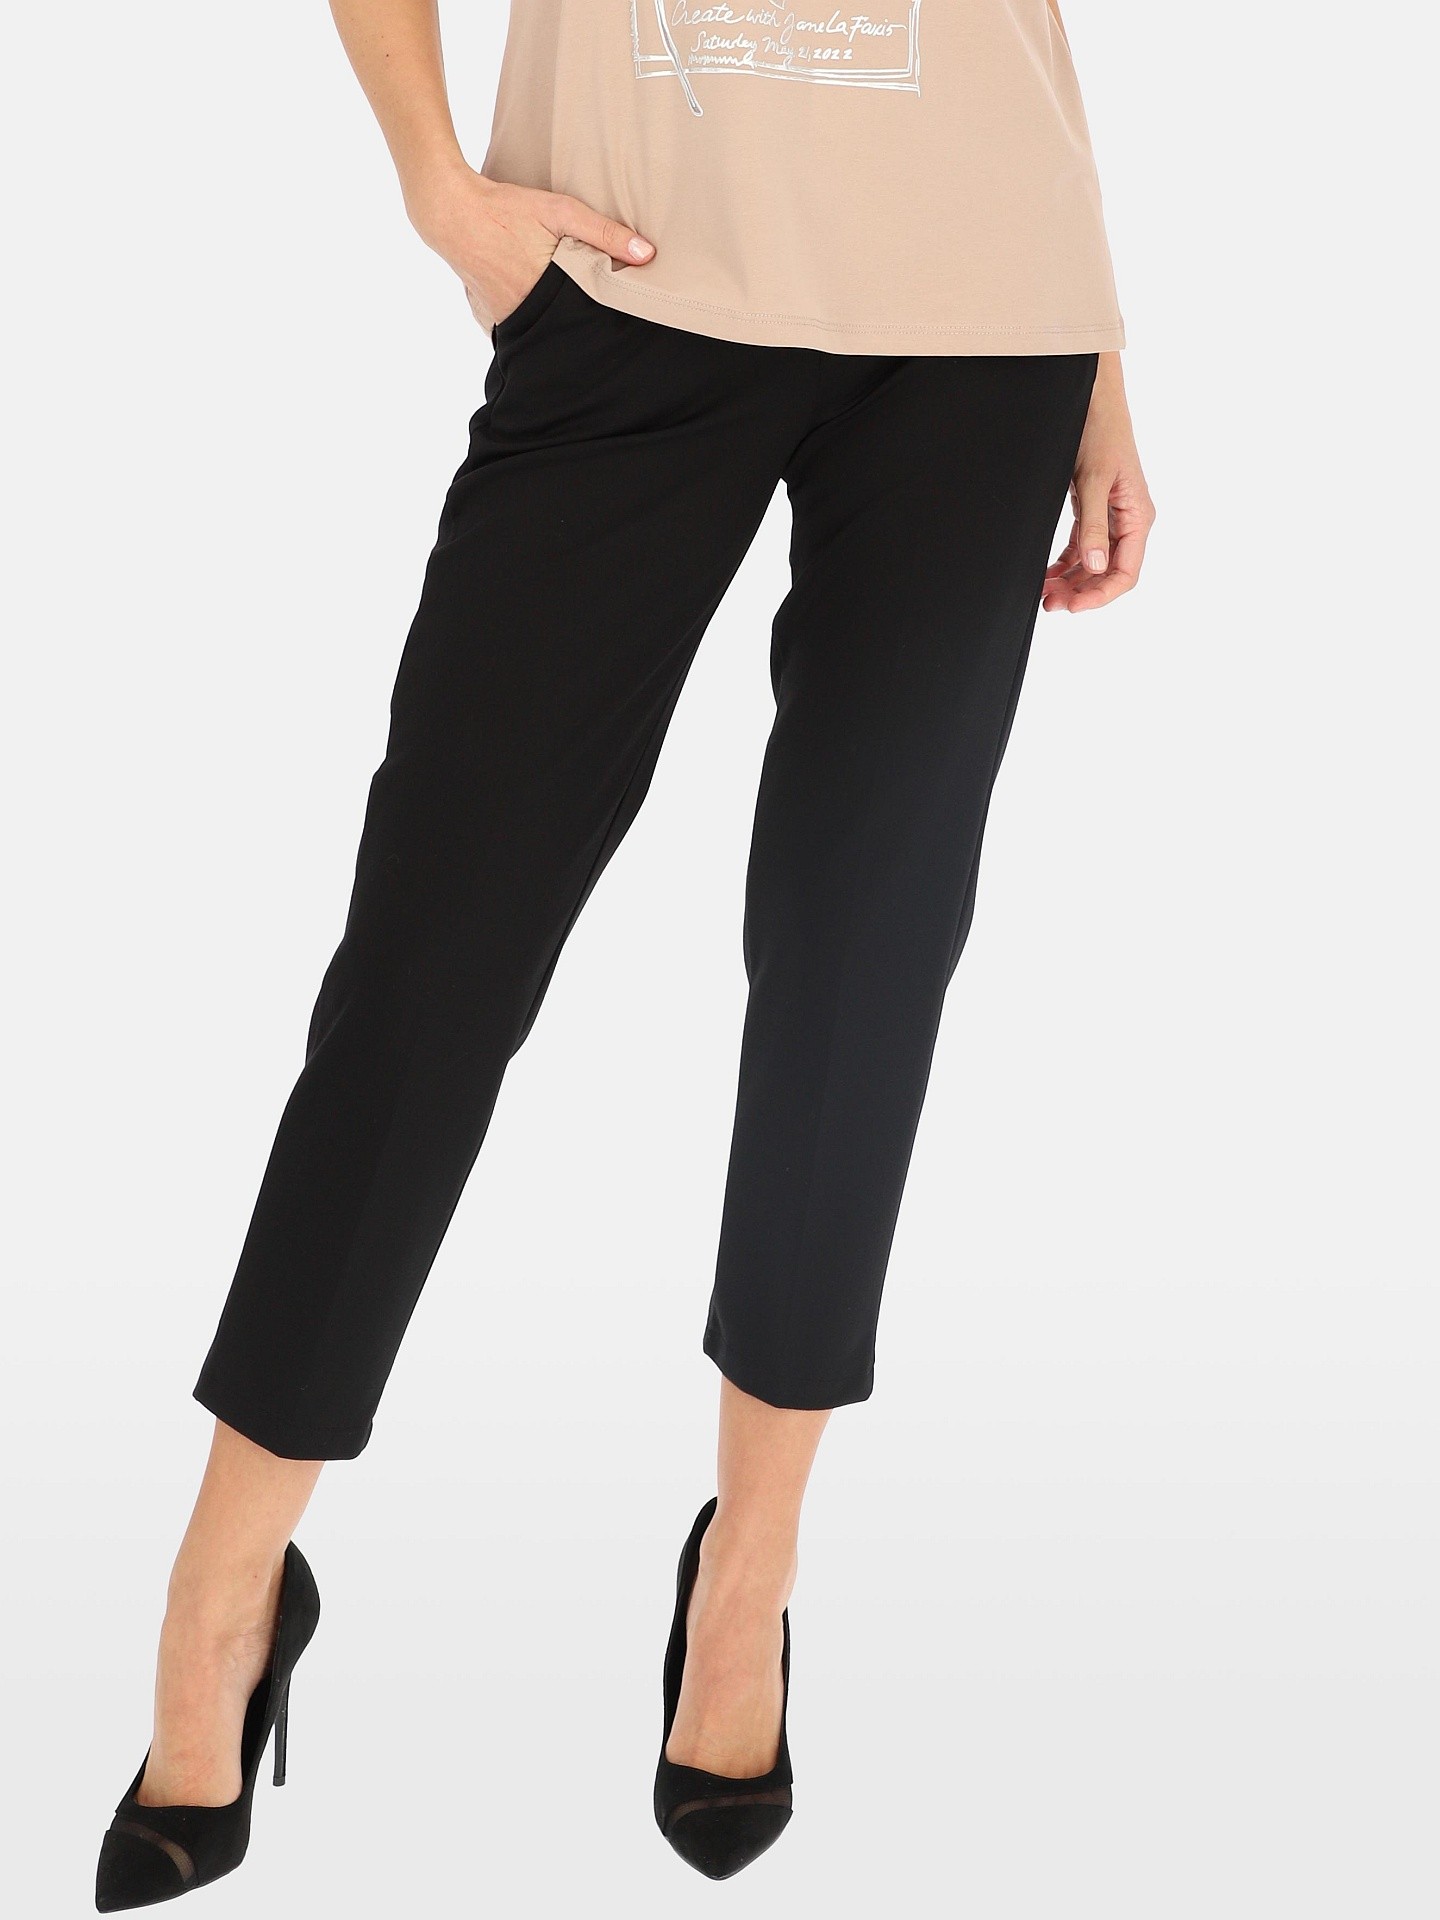 PERSO Woman's Trousers PTE242402F